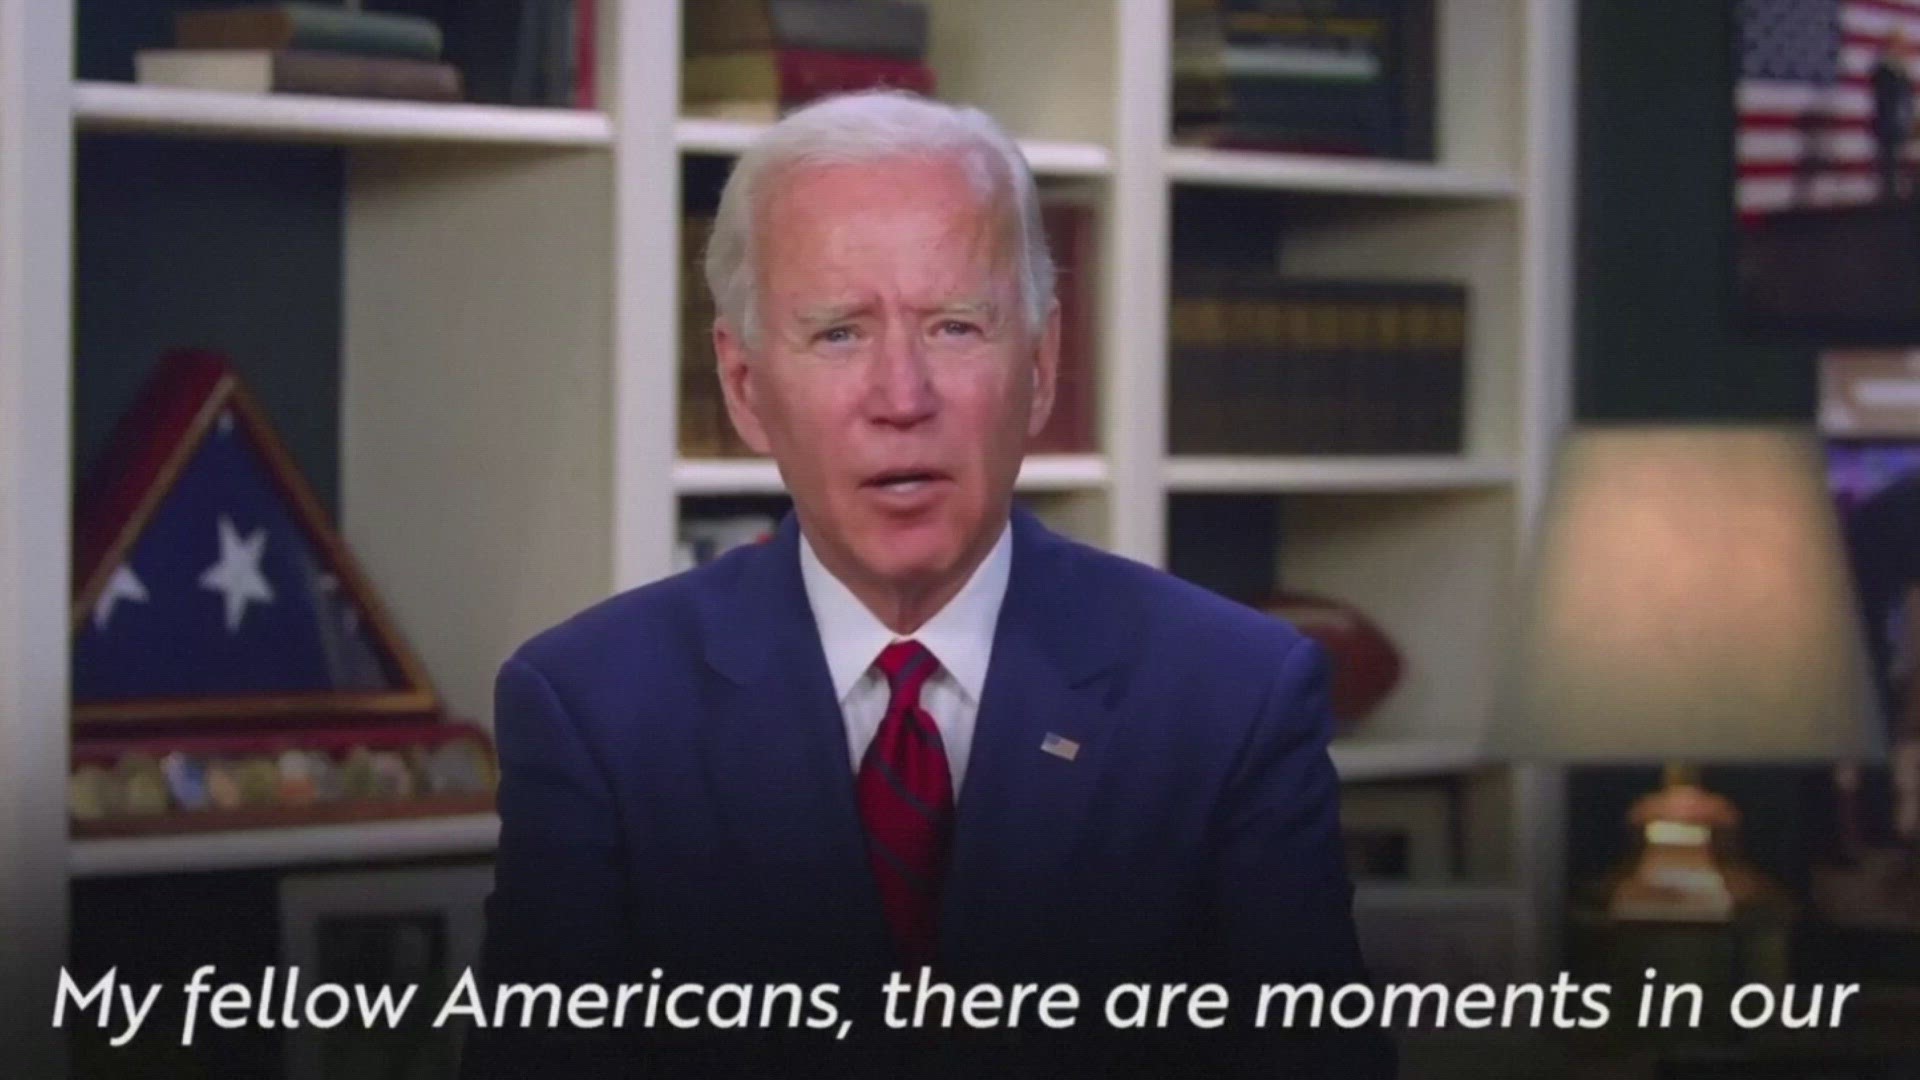 Presumptive Democratic presidential nominee Joe Biden says his running mate for the 2020 election will be named by August 1. Veuer's Justin Kircher has more.